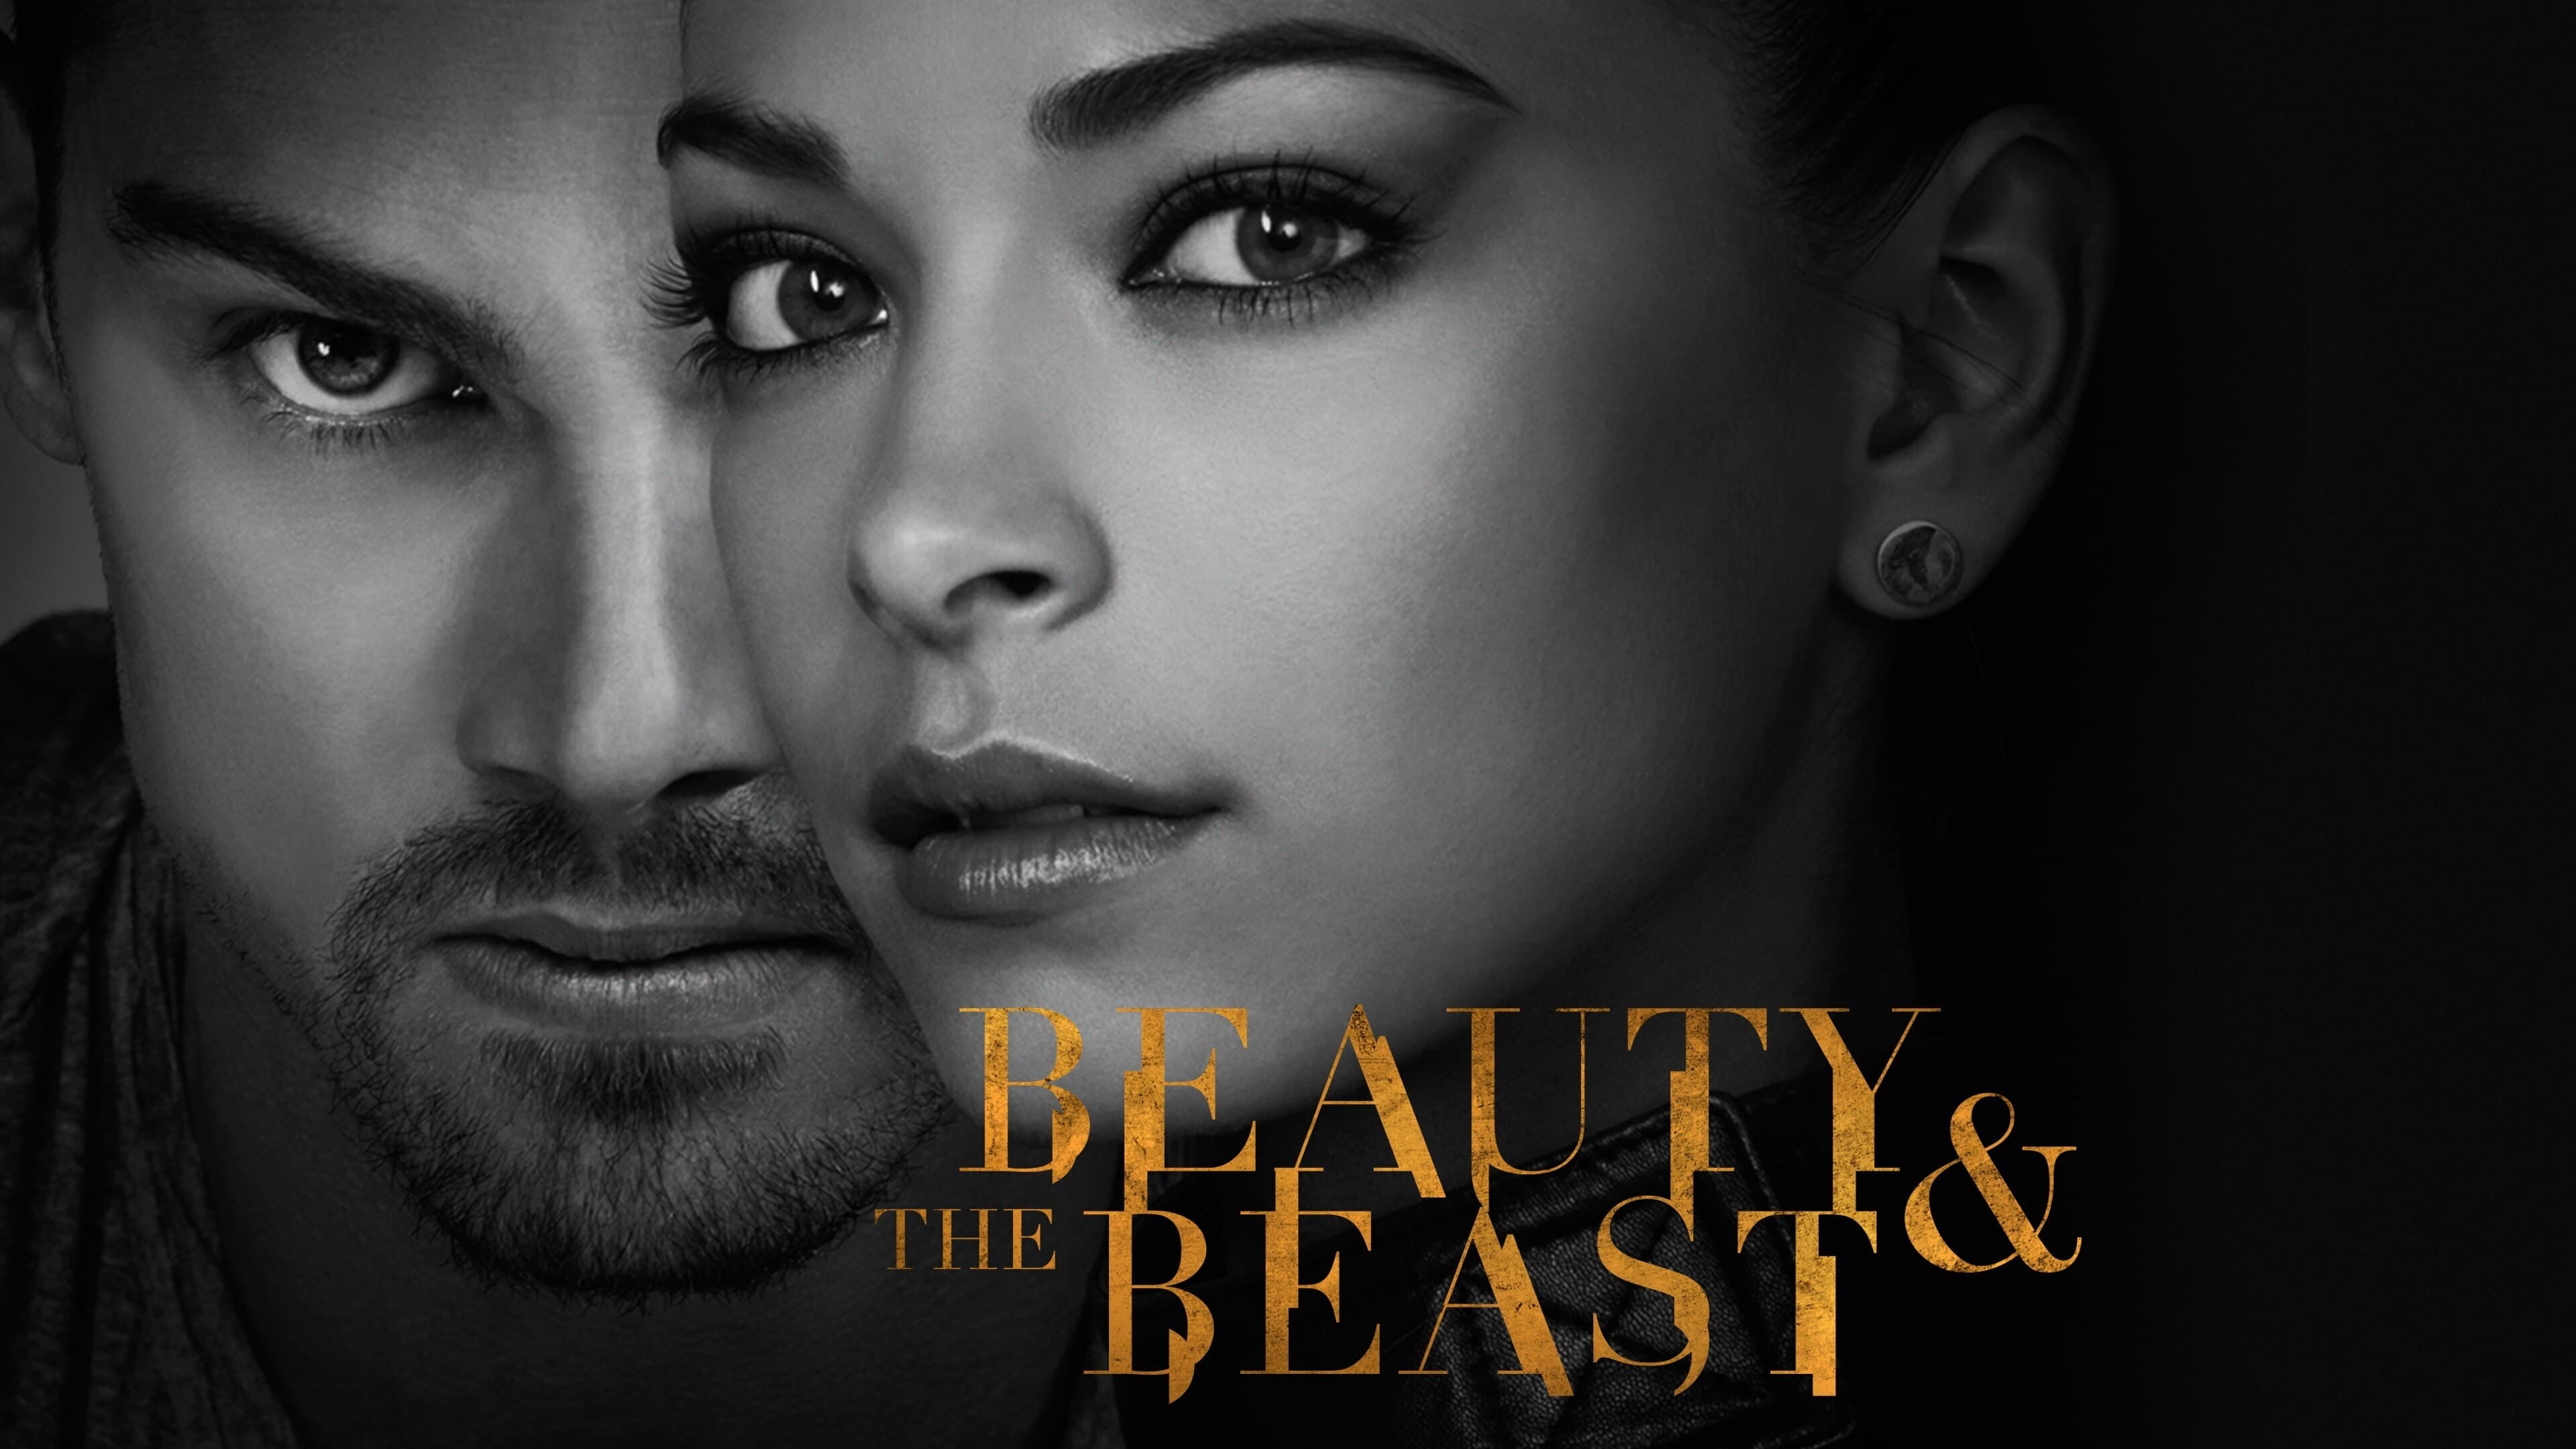 TV Show Beauty and the Beast (2012) 4k Ultra HD Wallpaper